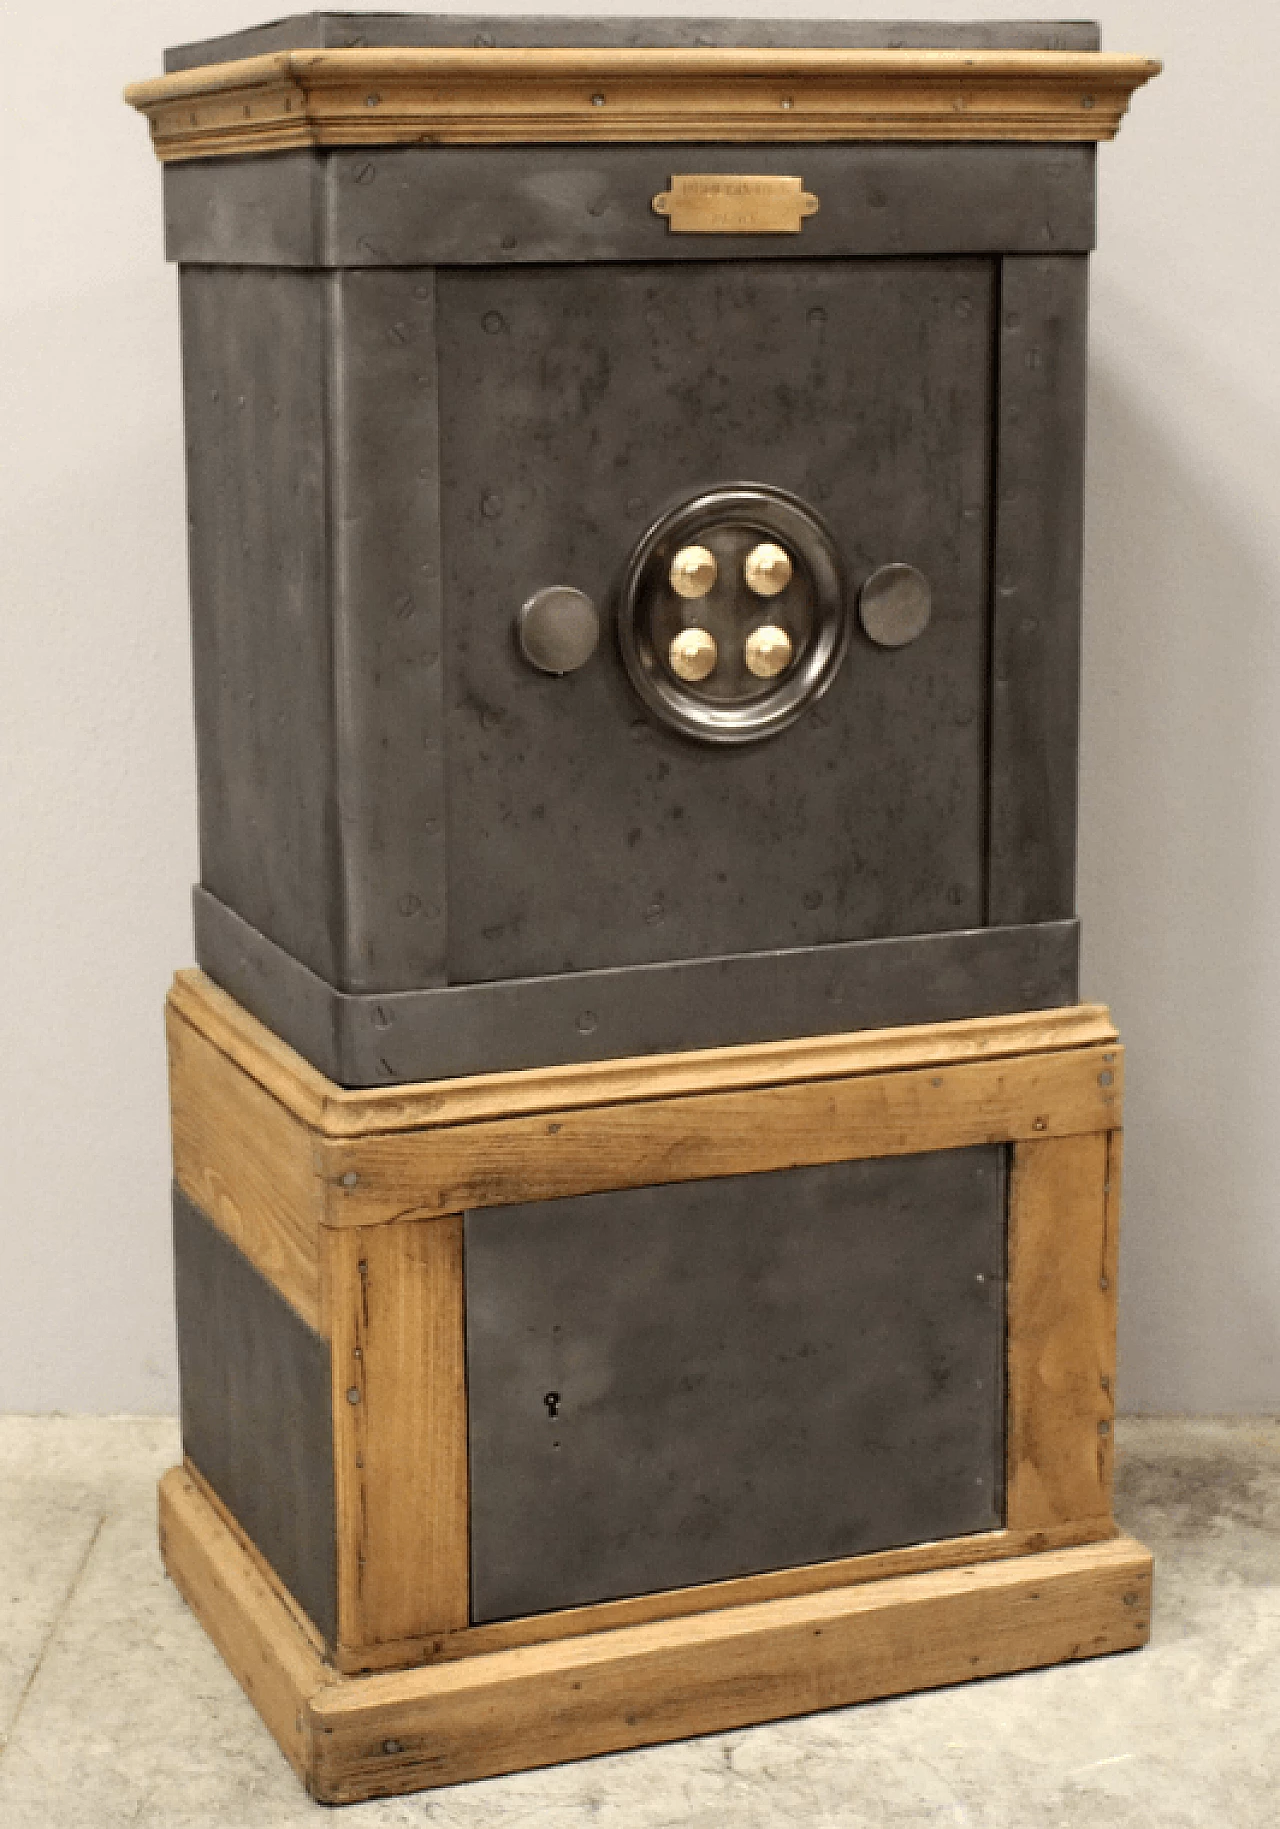 Iron and wood safe, late 19th century 10